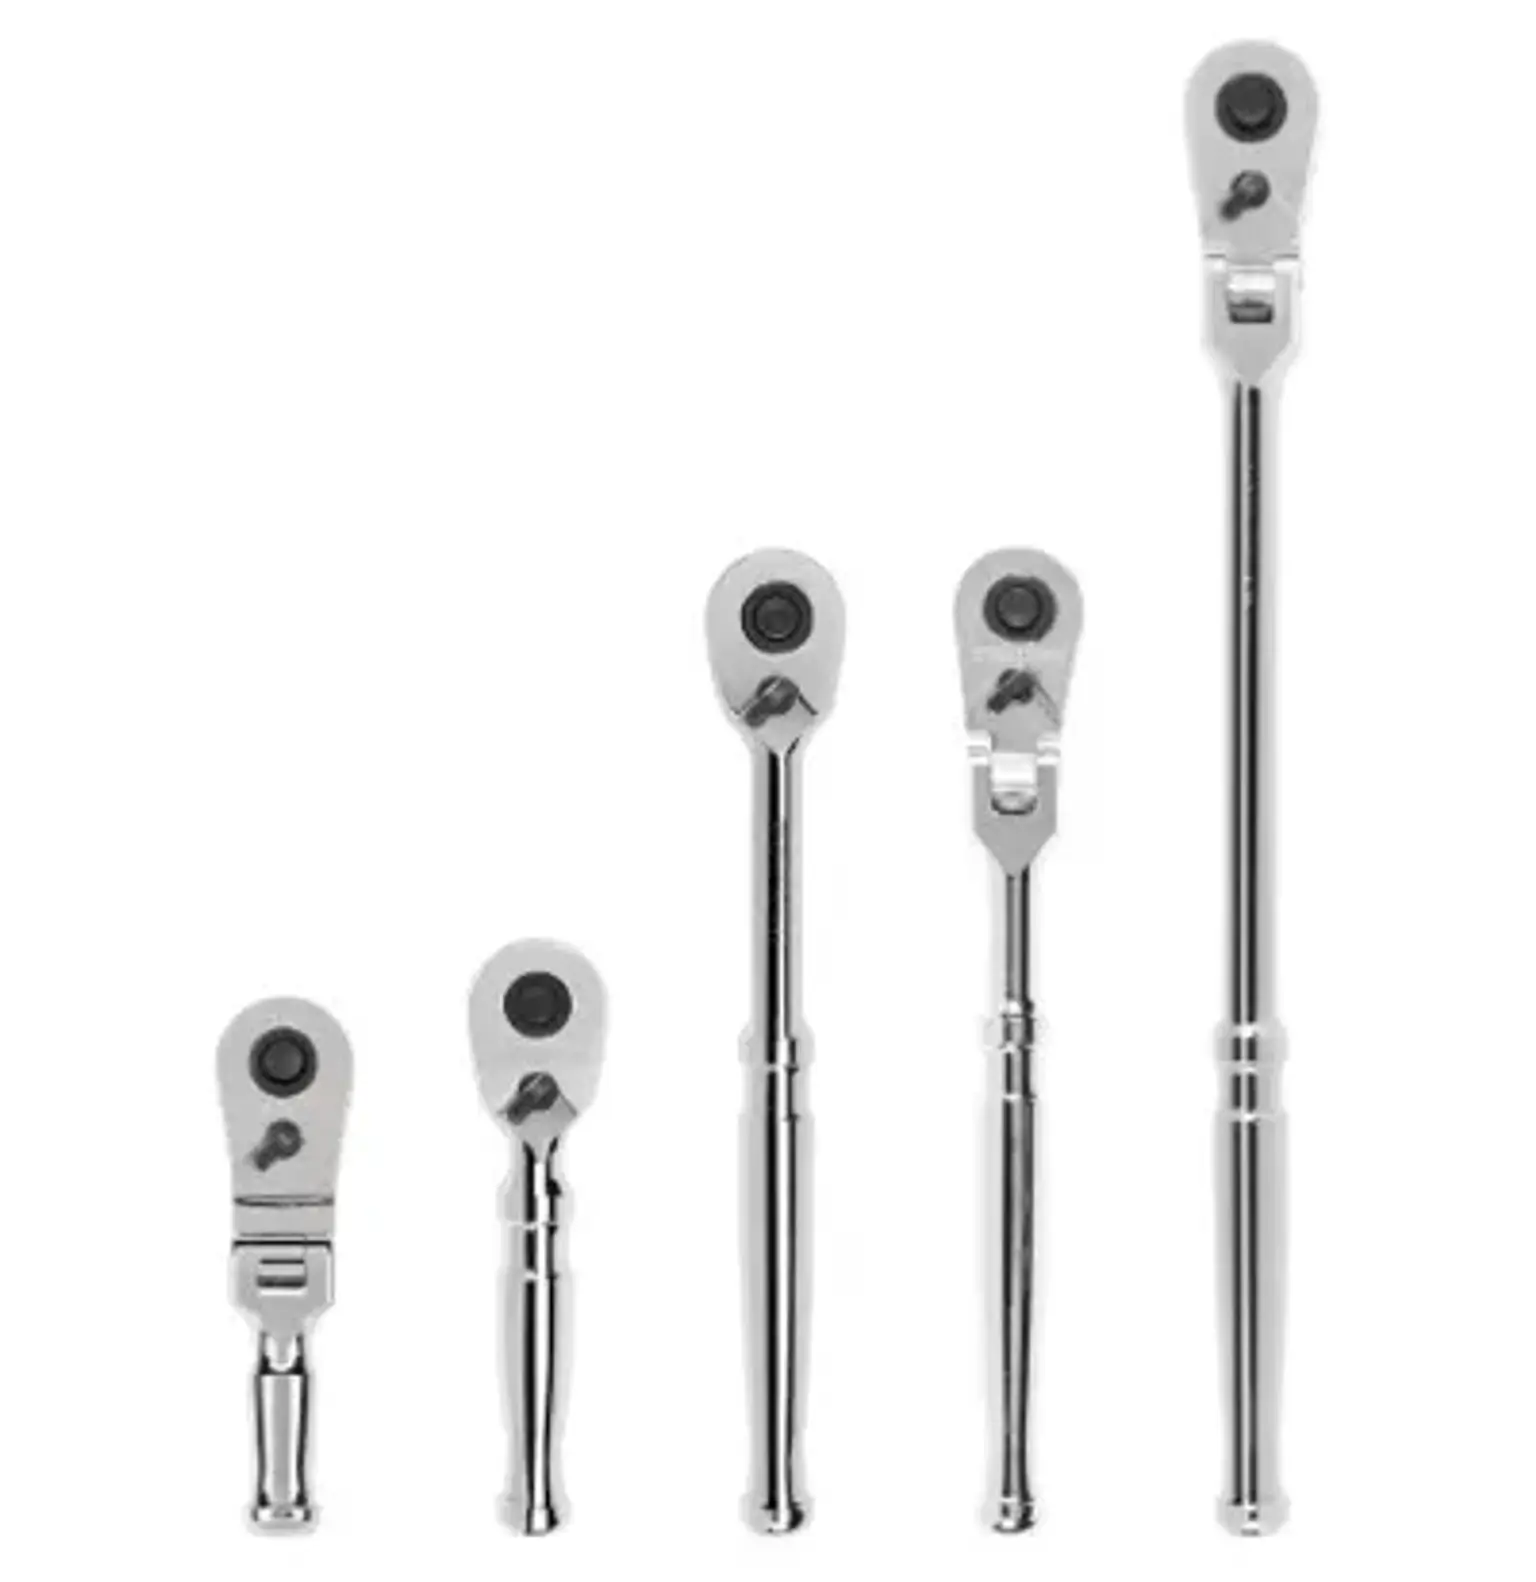 Tekton ratchet set with stubby, regular, and long length quick-release ratchets